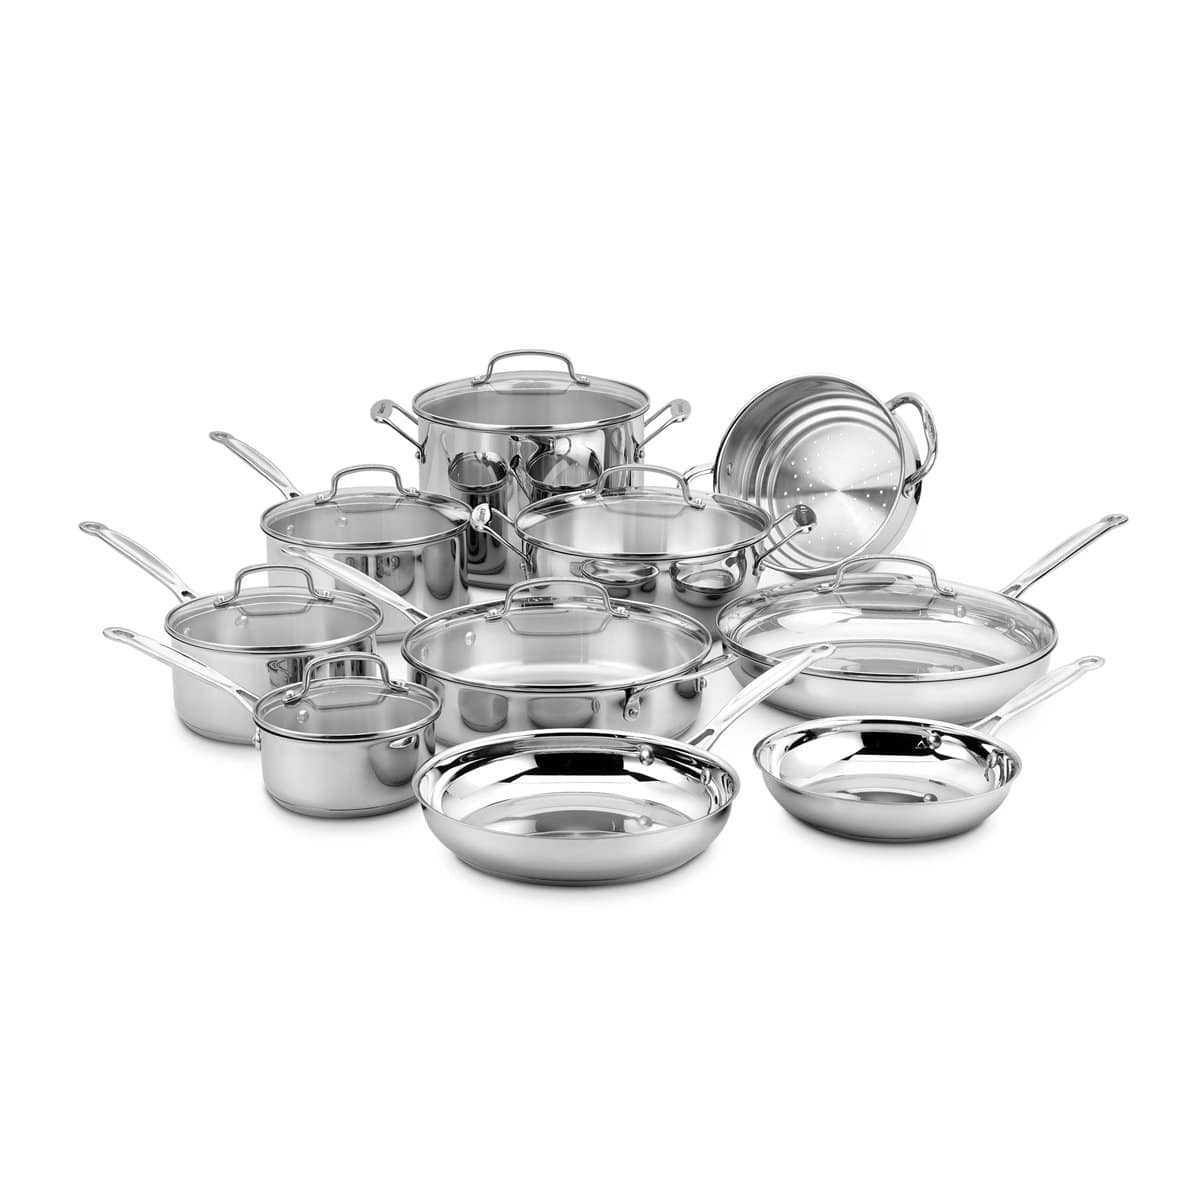 https://cdn.shopify.com/s/files/1/0474/2338/9856/products/cuisinart-cuisinart-chef-s-classic-stainless-steel-17-piece-cookware-set-086279101846-19593469231264_1600x.jpg?v=1604183432